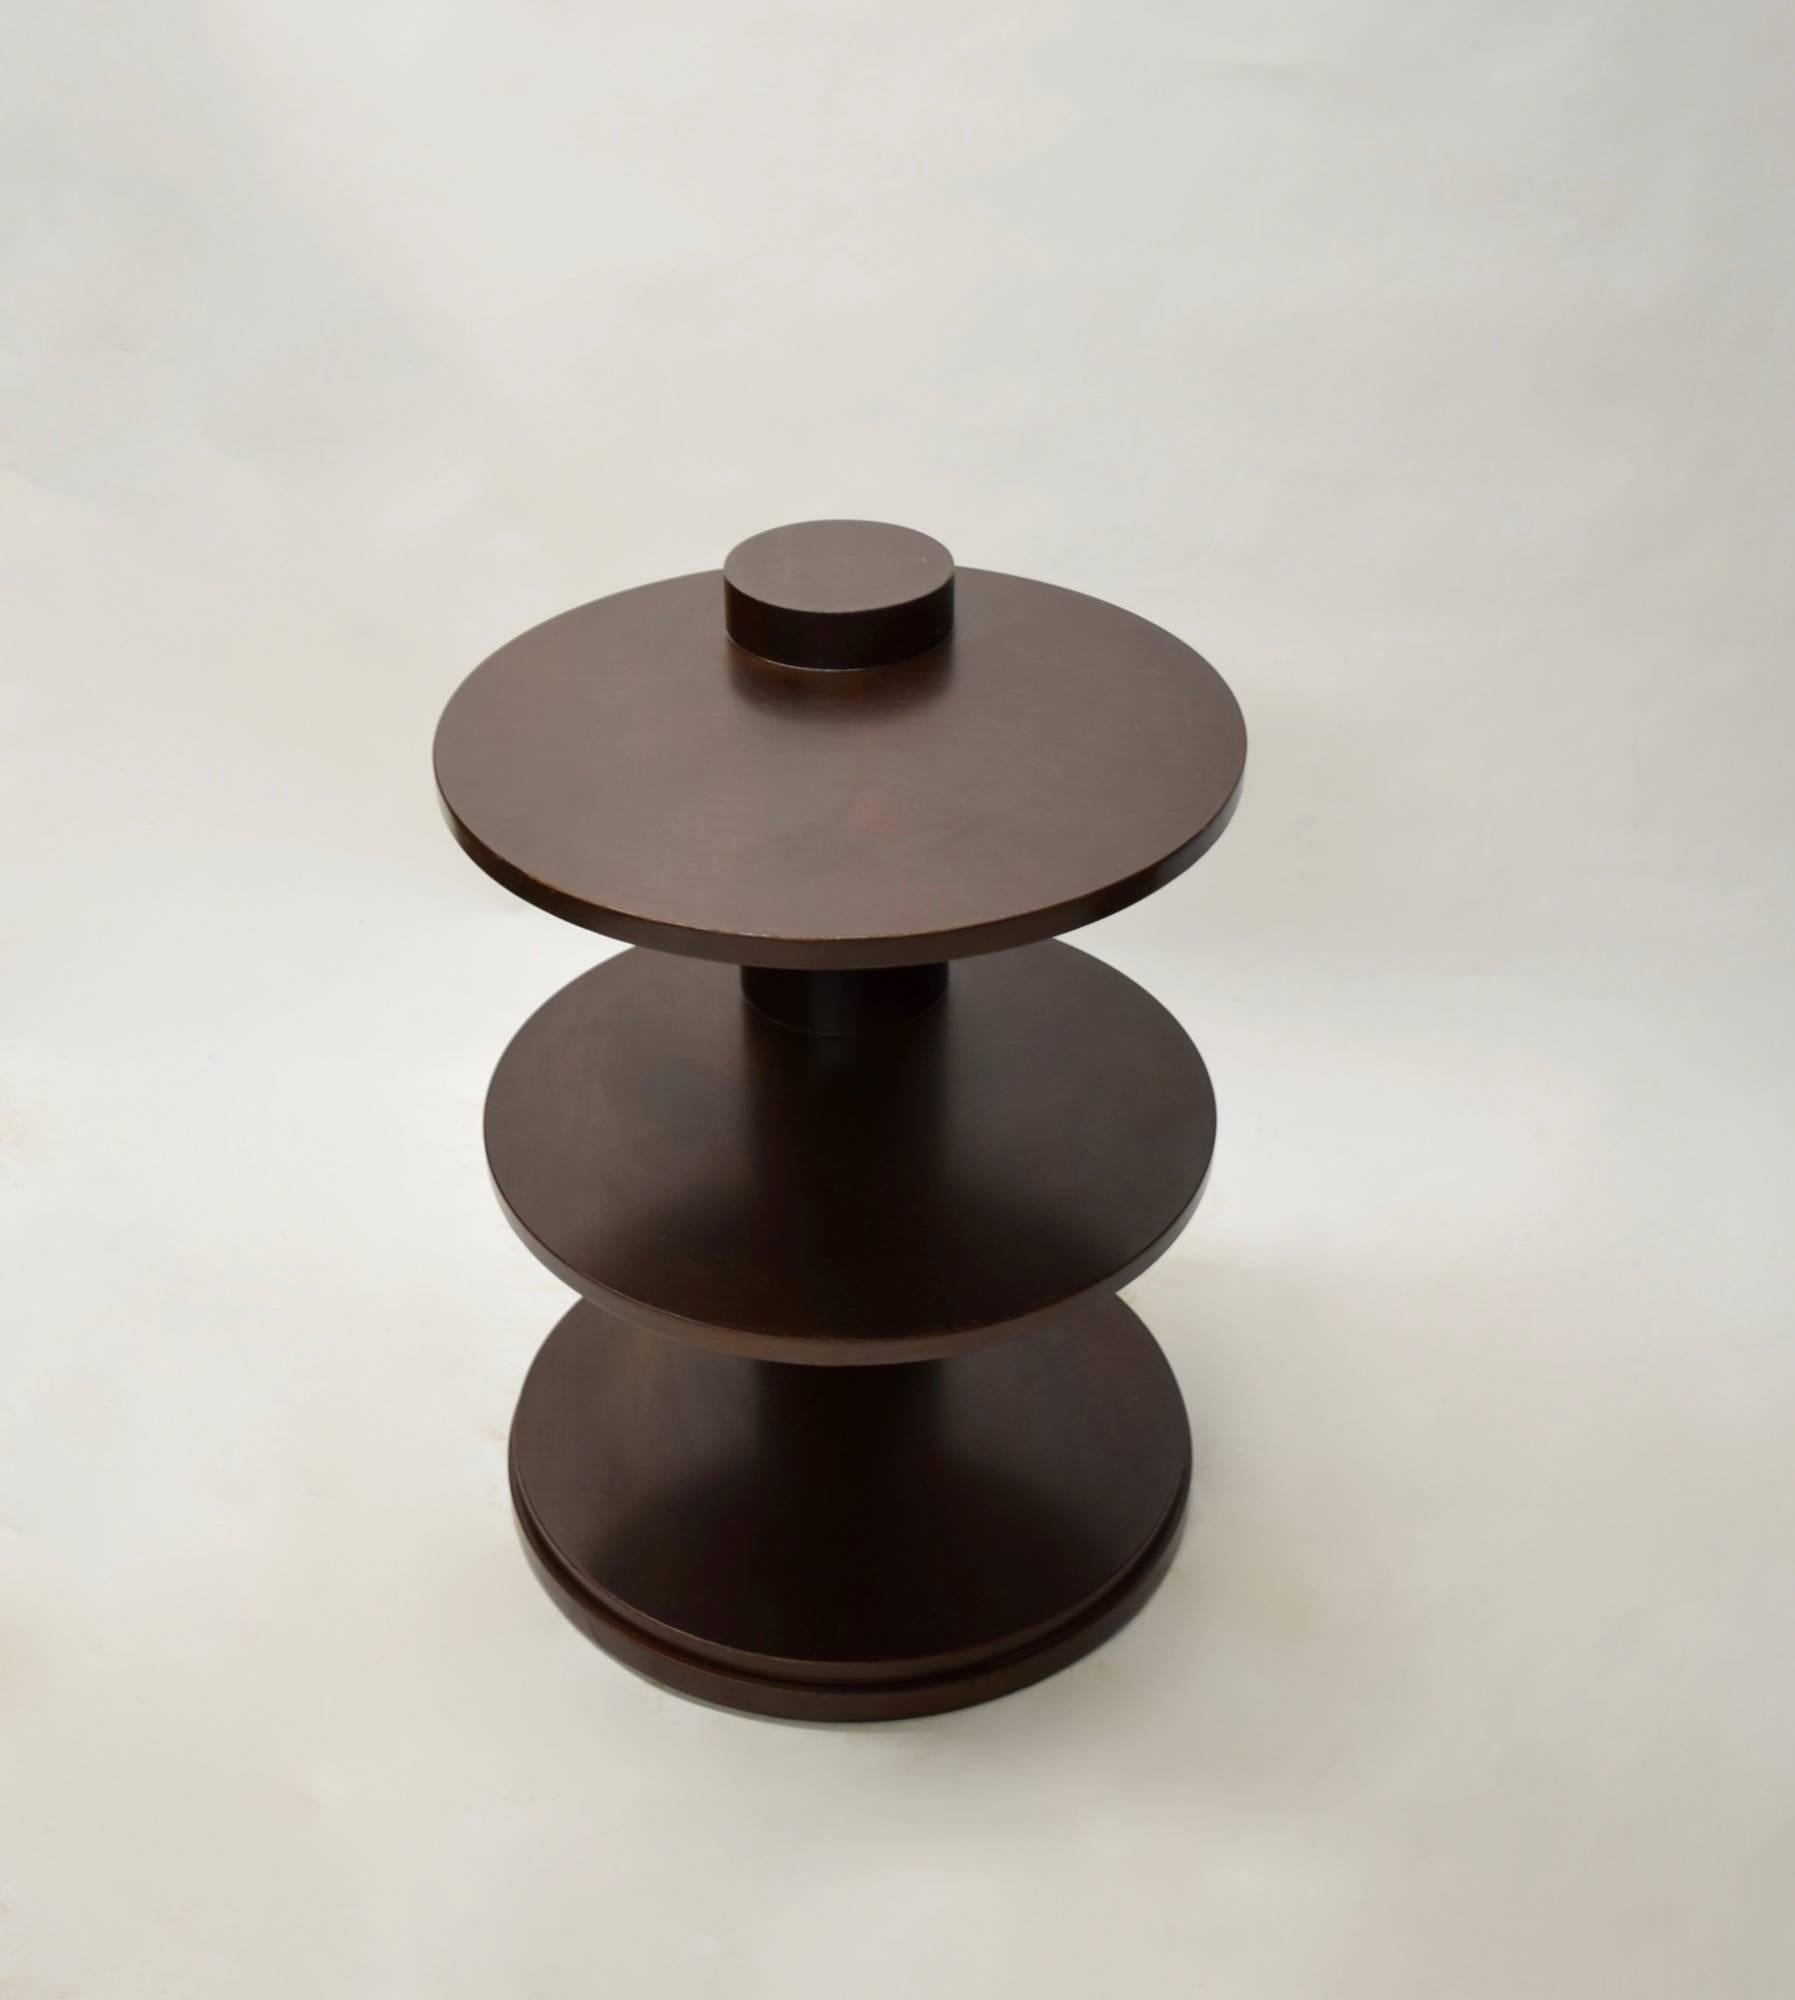 Traditional pair of solid walnut side tables with a dark stained finish by Ralph Lauren. Each table has three round shelves and a single round column that supports them.